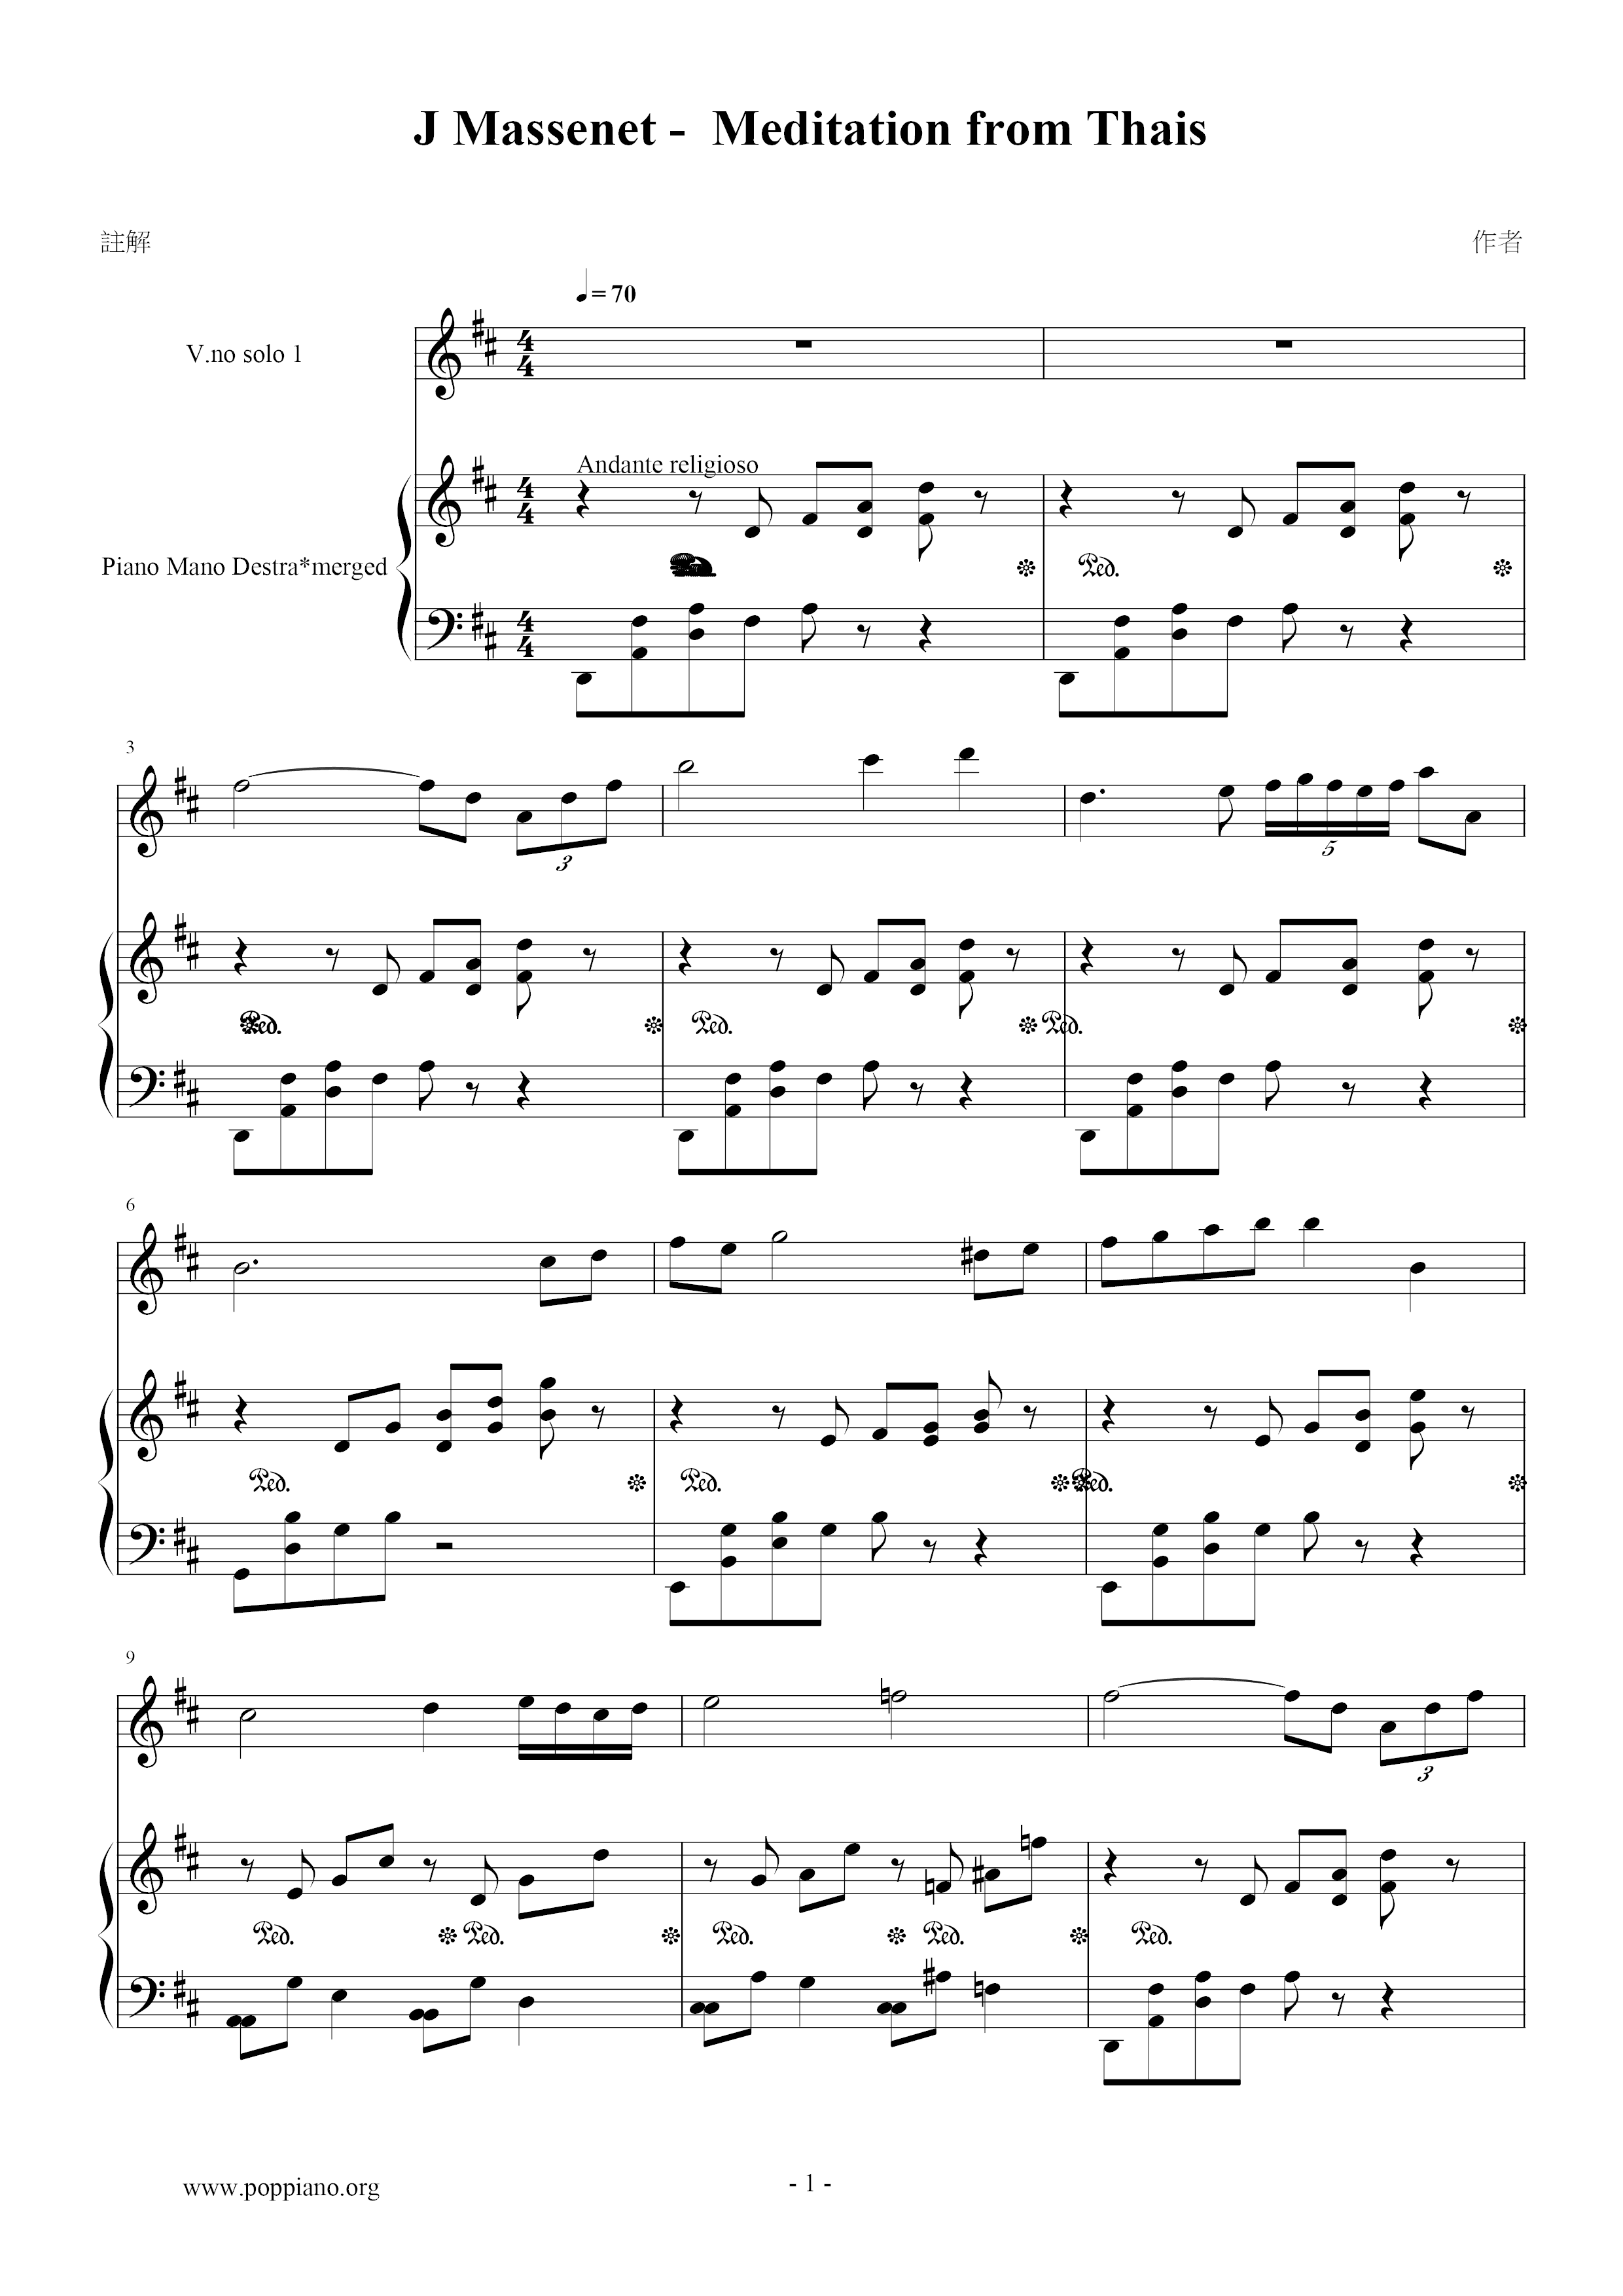 Meditation from Thais Score